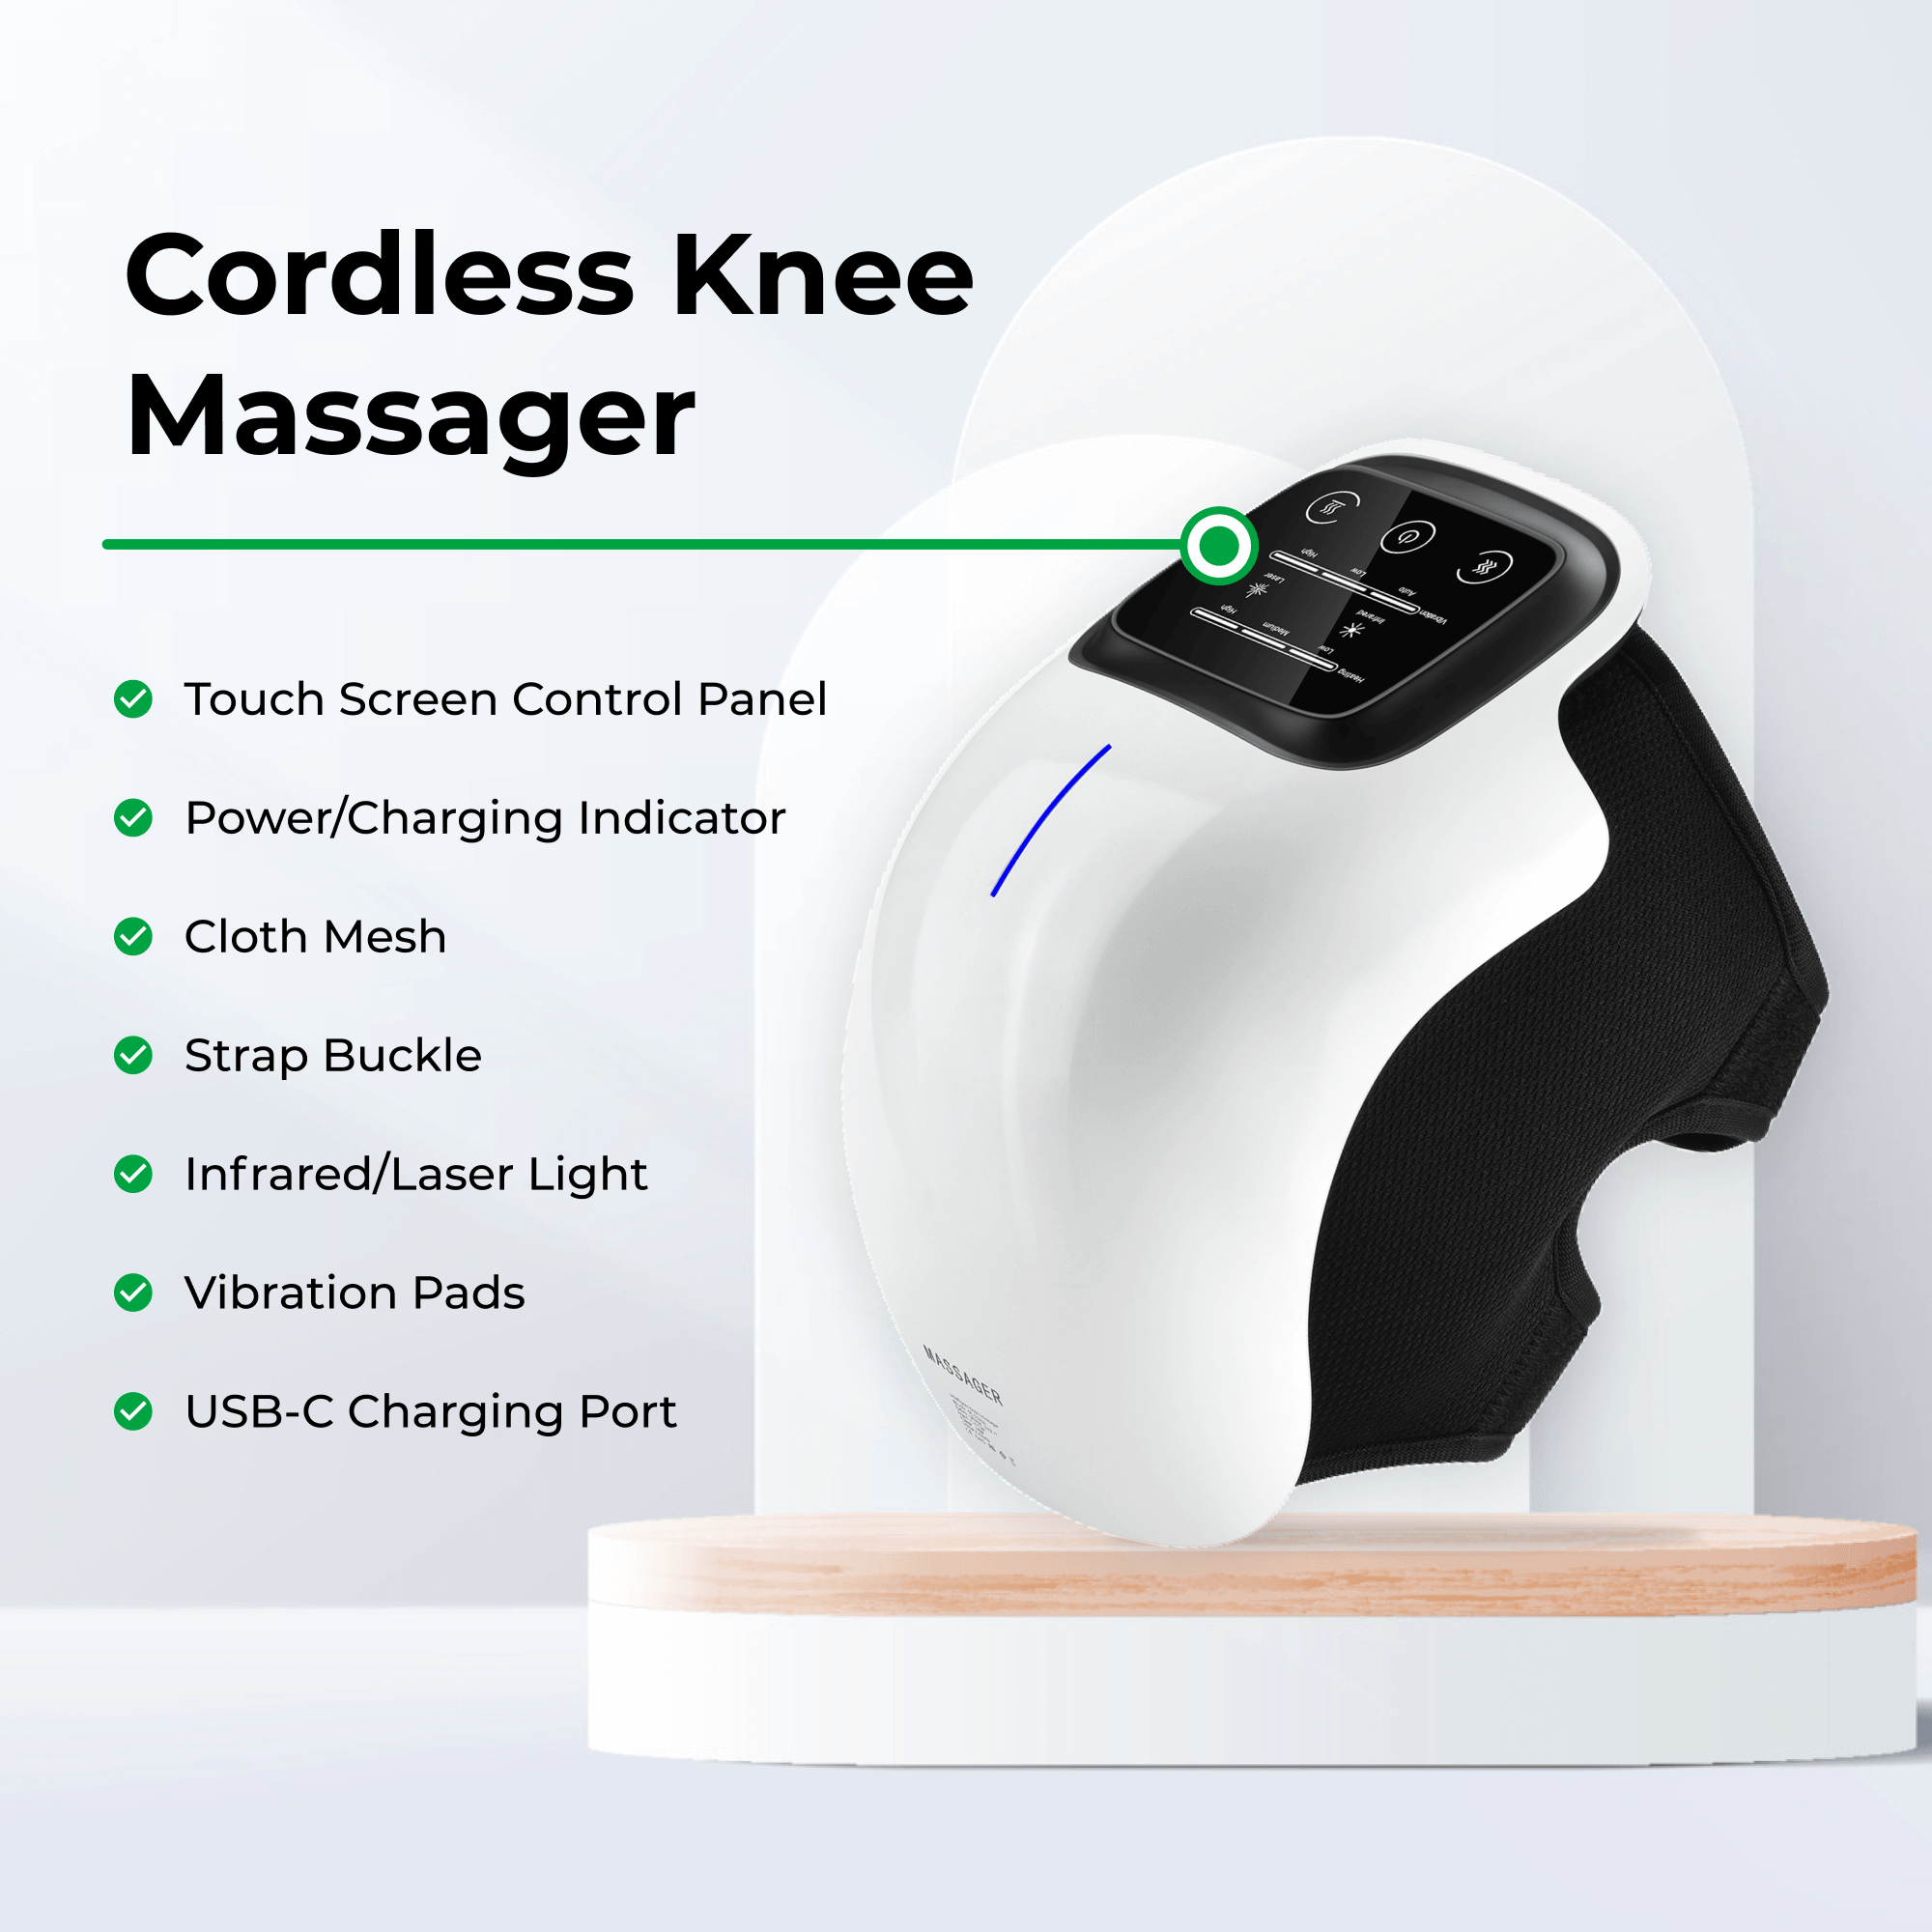 Knee Massager By WiFi: Wireless, Constant Temperature, Infrared Vibration,  Double Coil Design For Tension Relief, Sleep Support From Bian04, $34.99